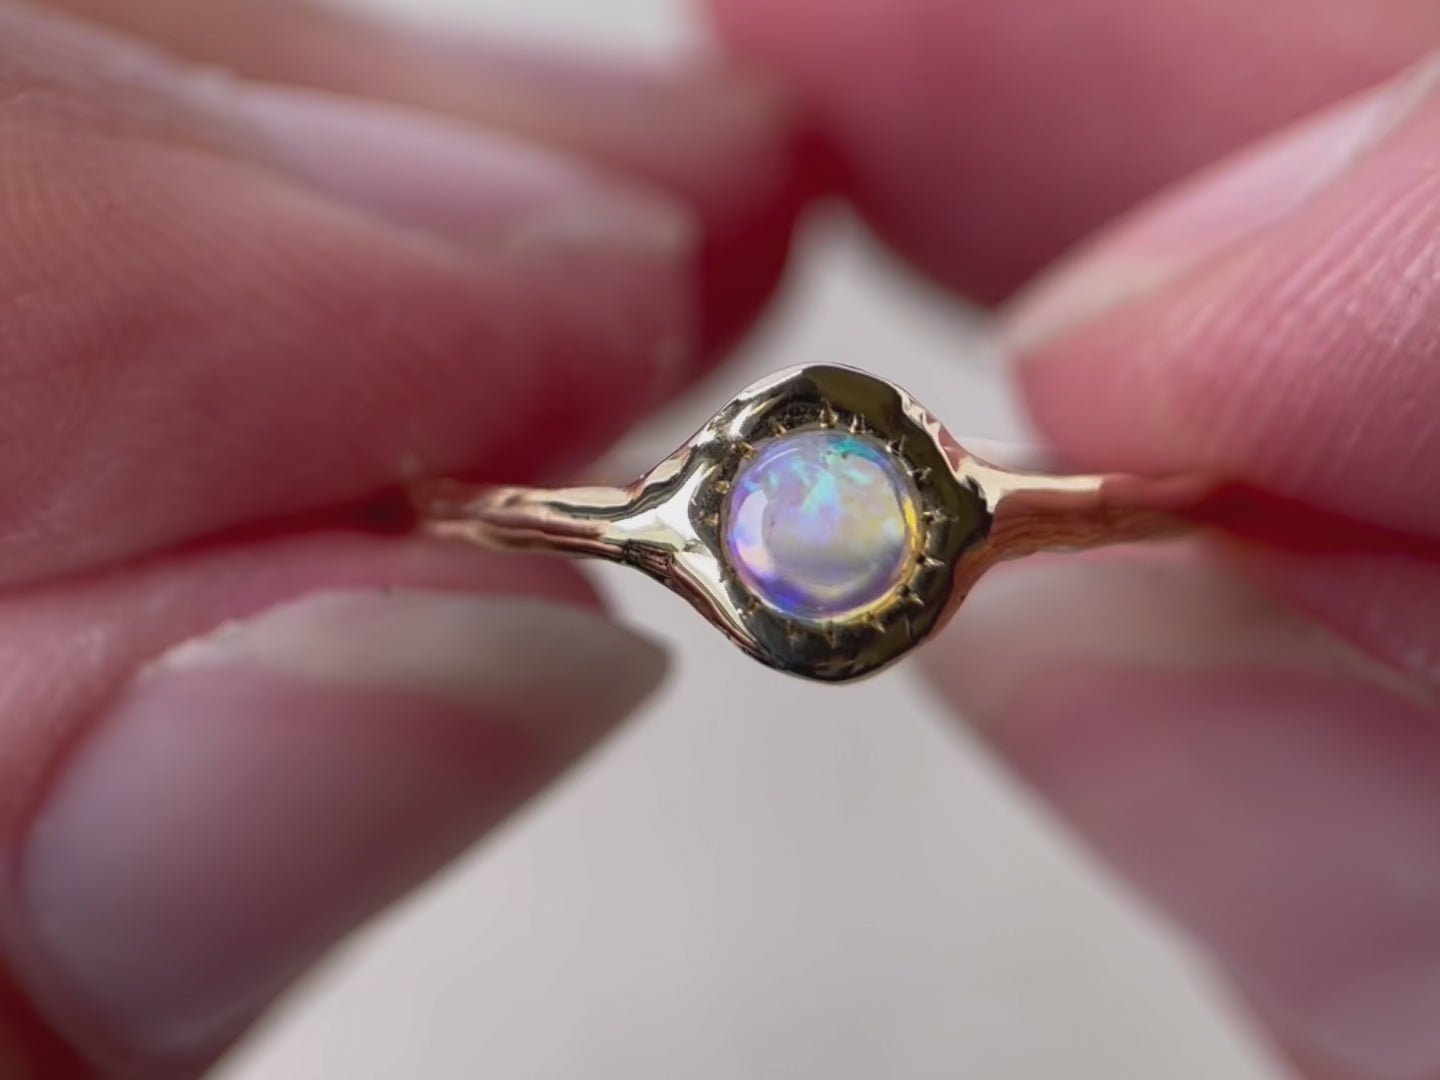 A close up video of a round opal ring, set on a slender band with small tick-like accents that radiate like a starburst, creating a mesmerizing and celestial jewelry piece.